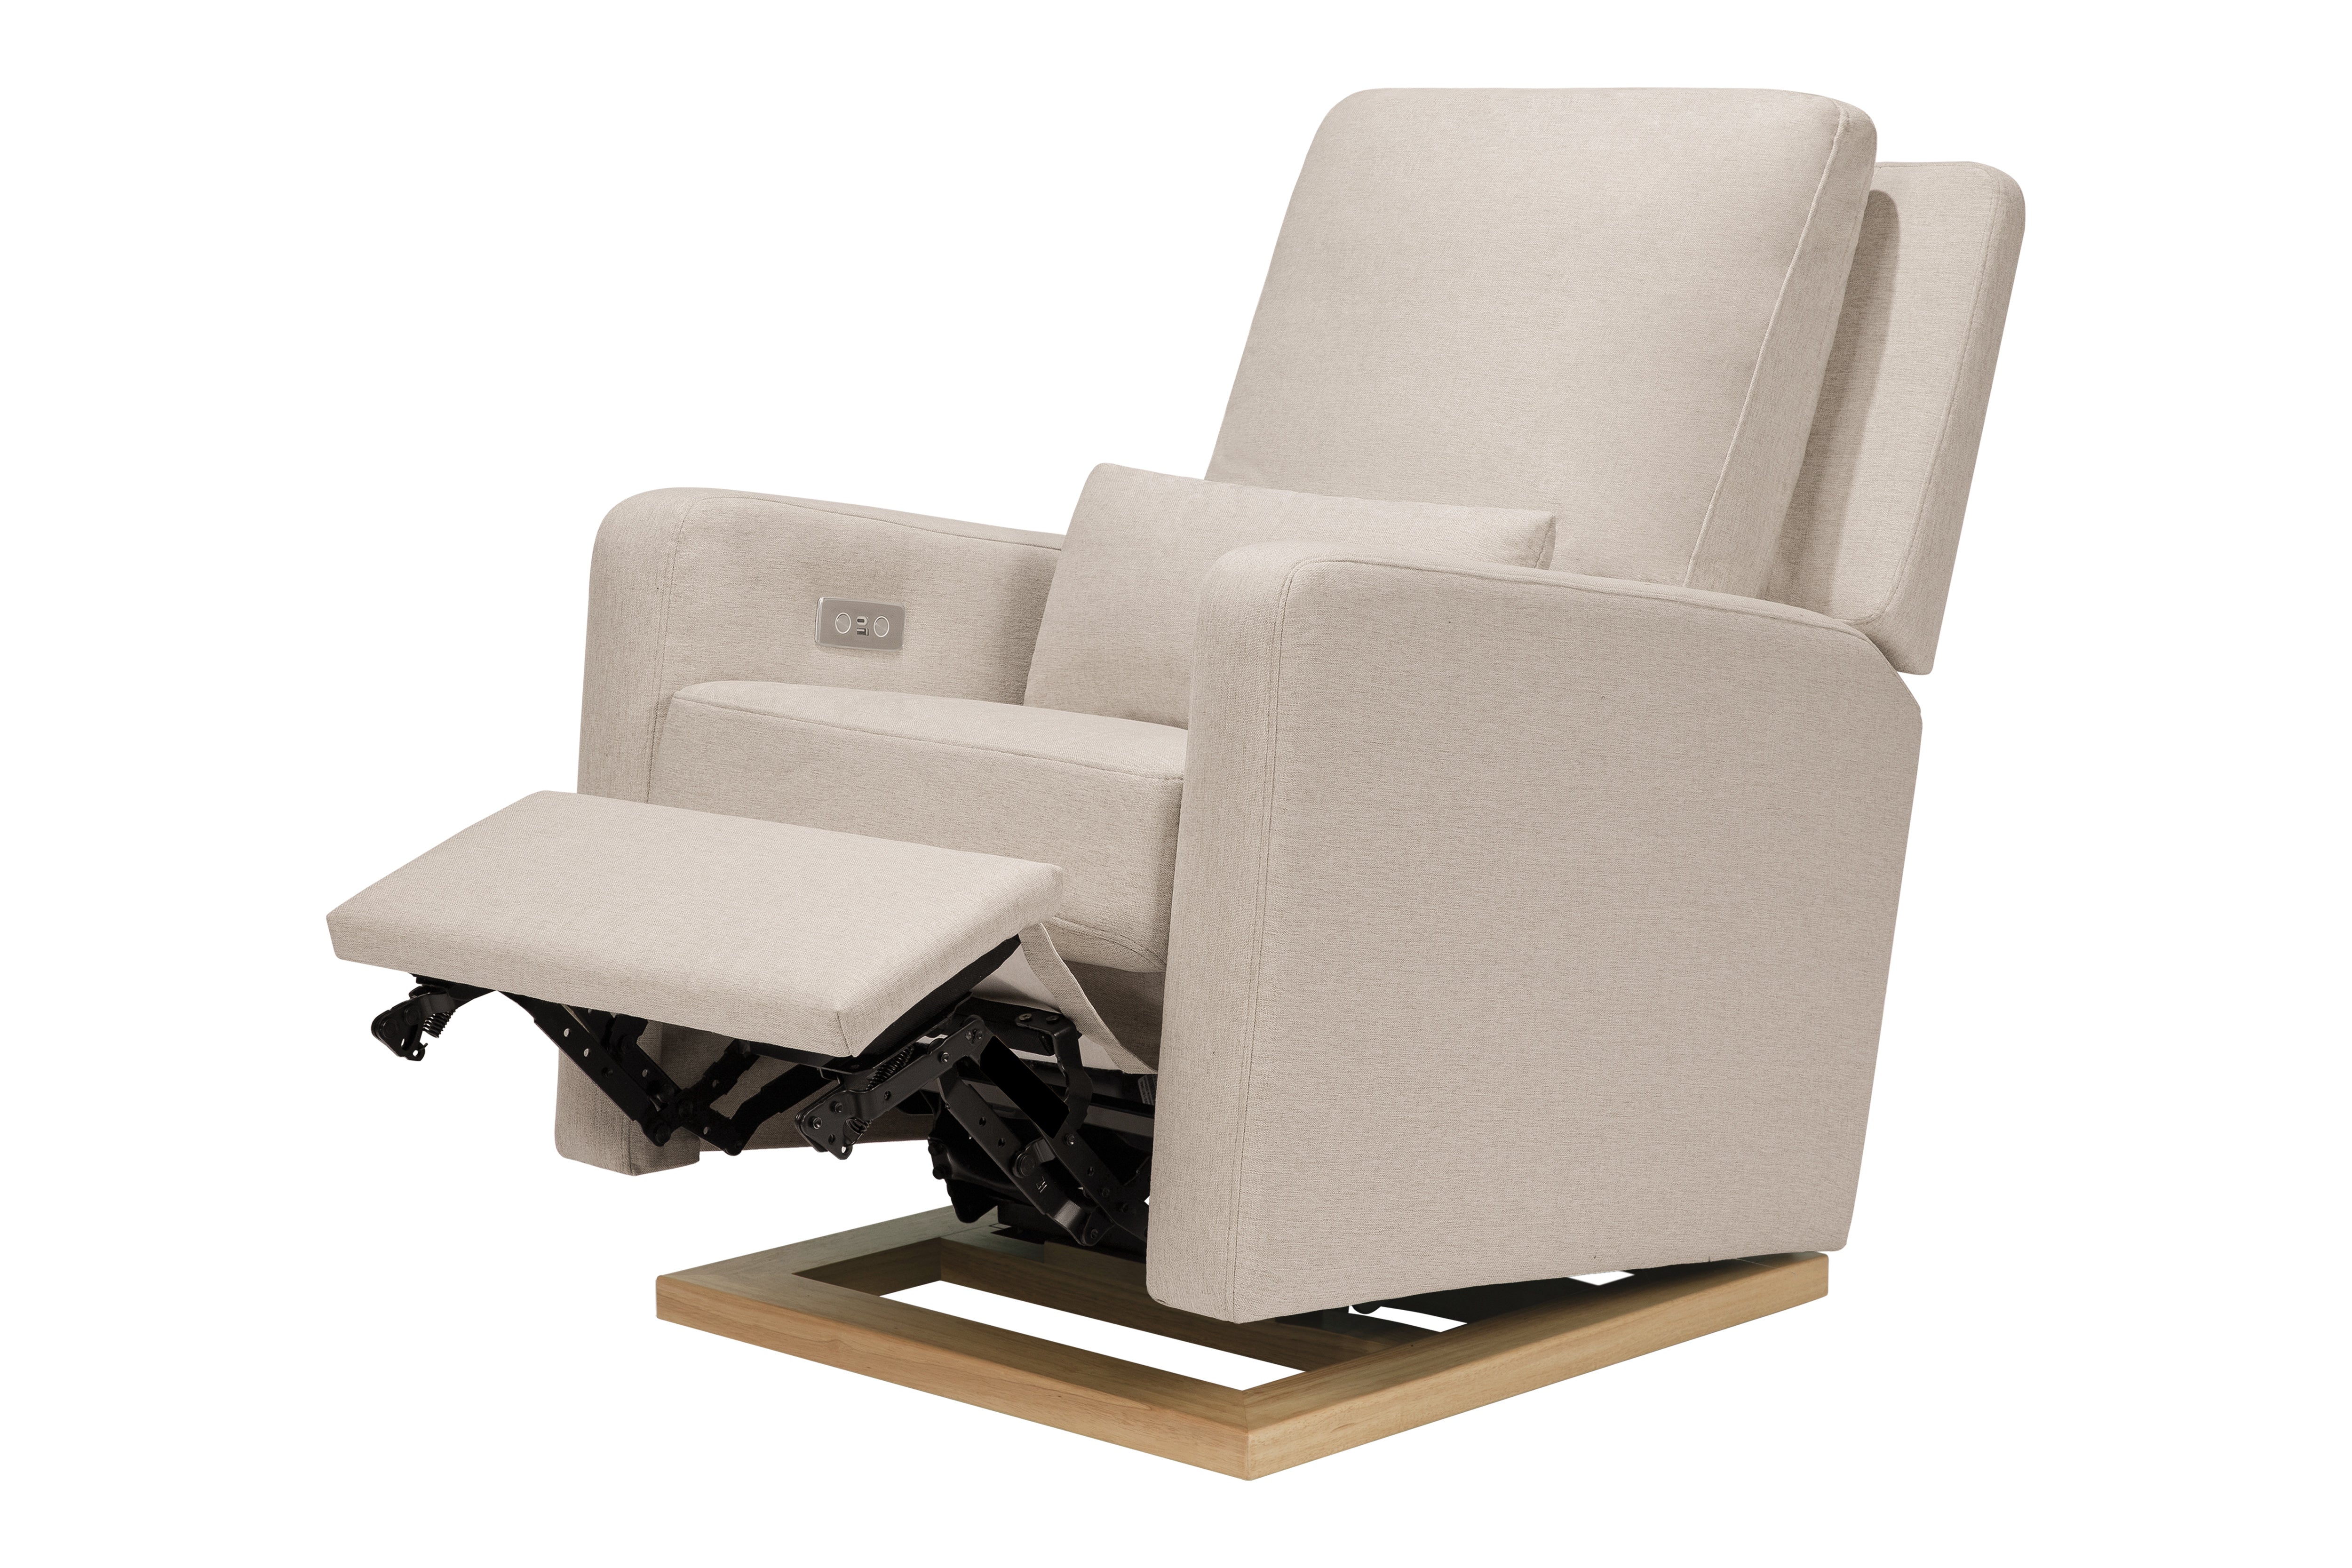 Sigi Electronic Recliner and Glider in Performance Beach Eco-Weave with Light Wood Base - Twinkle Twinkle Little One